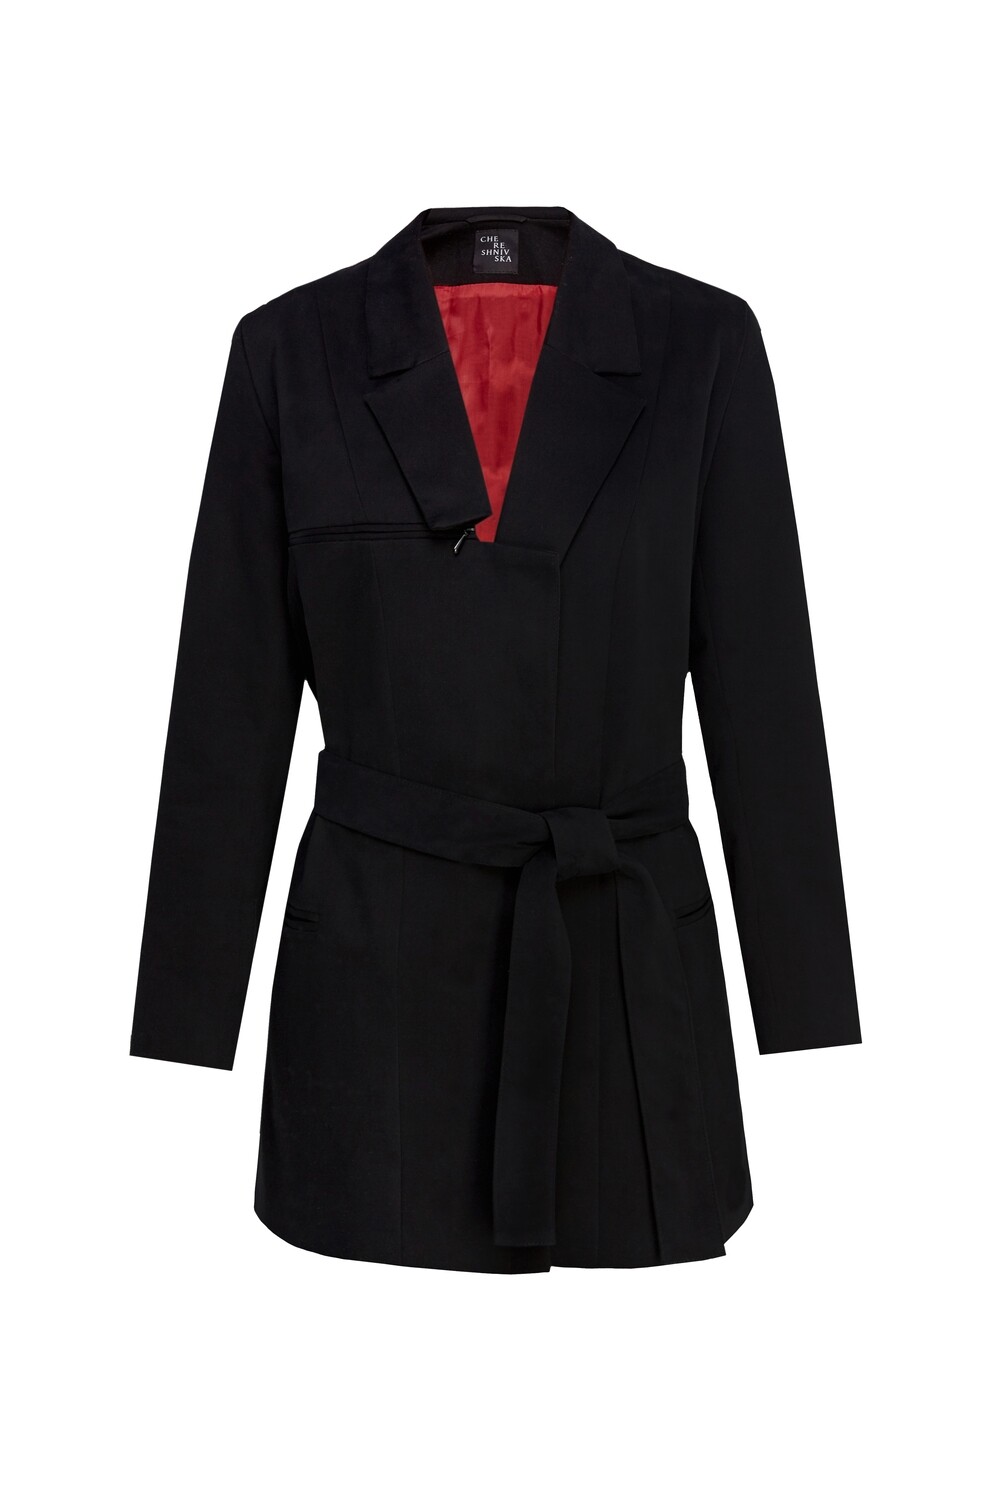 Black jacket with red lining